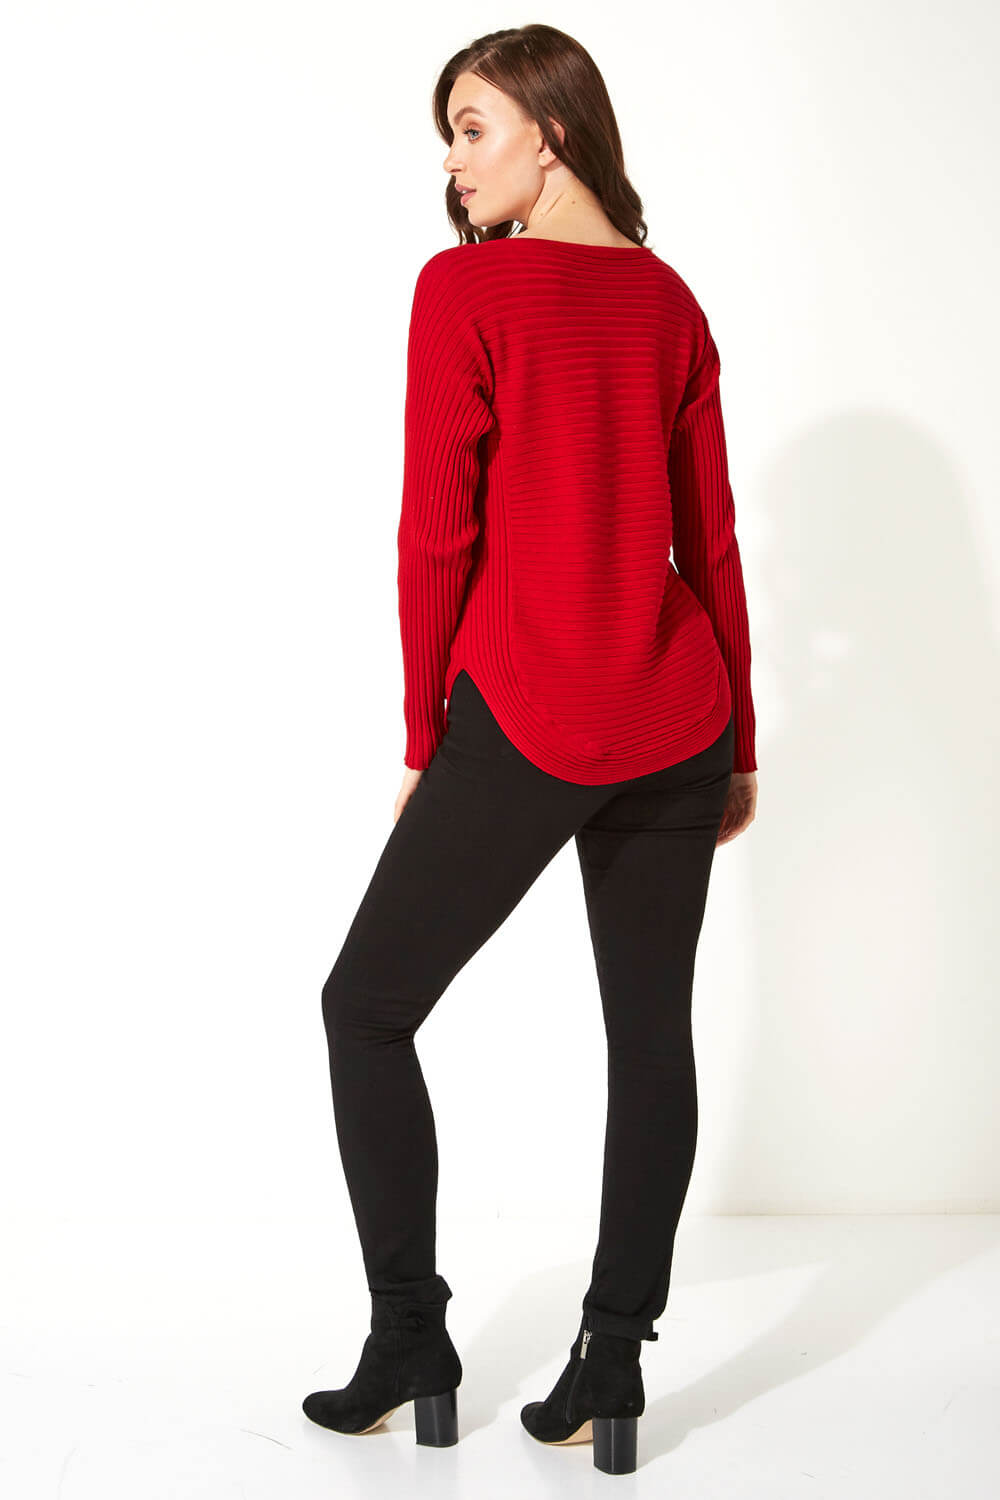 Red Zip Front V Neck Jersey Long Sleeve Top, Image 3 of 5